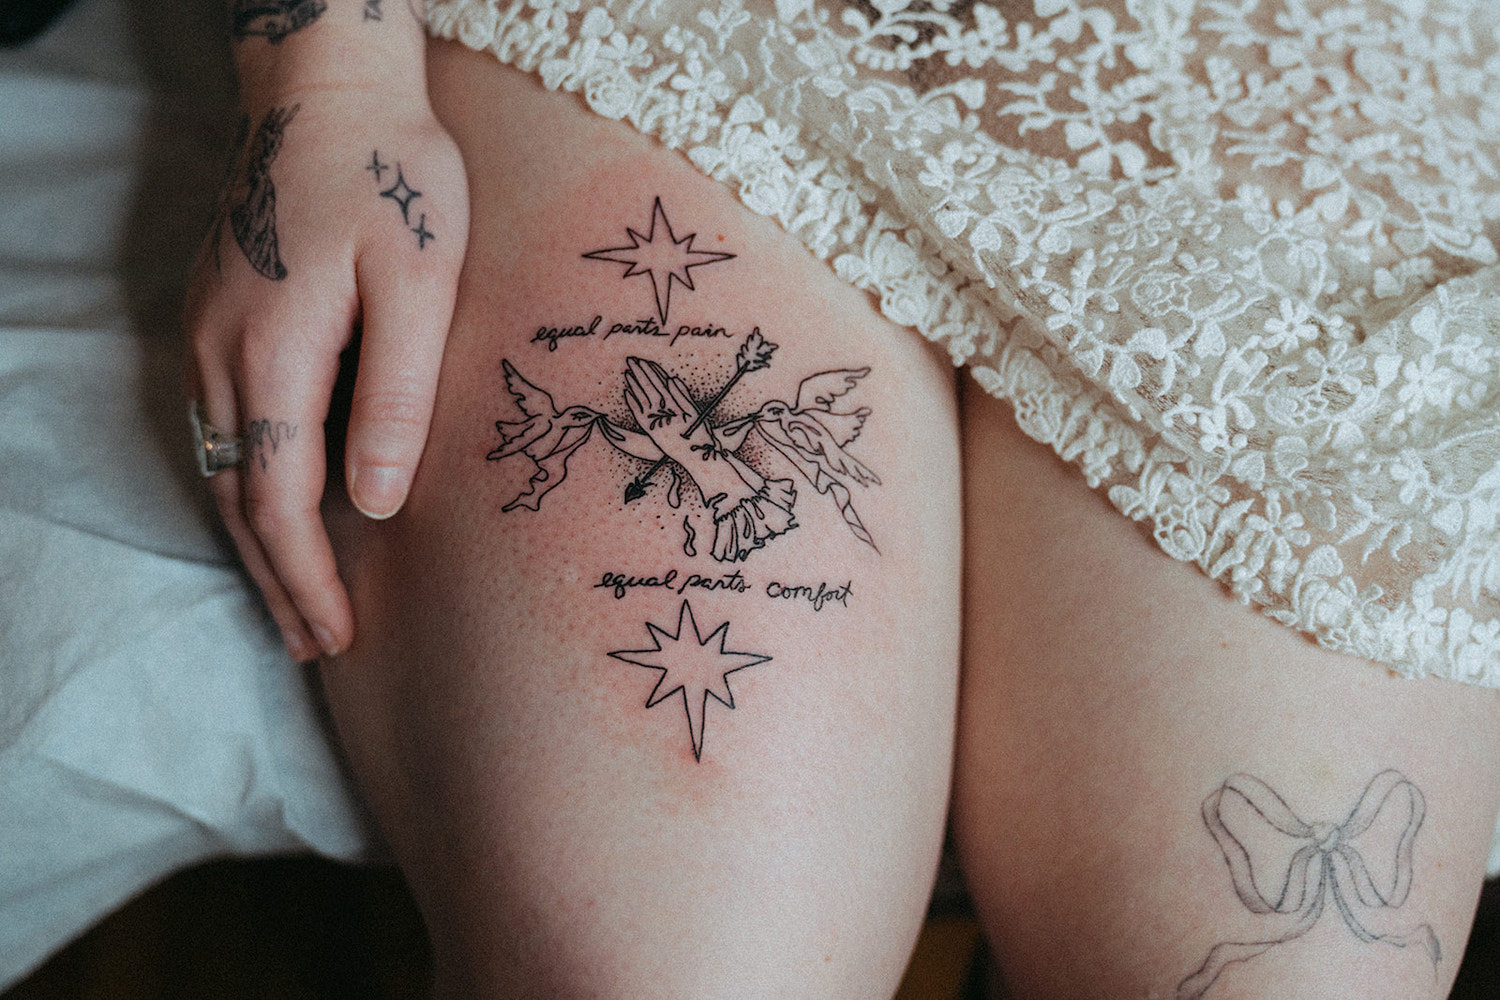 Close-up of tattoos on thighs and along a hand